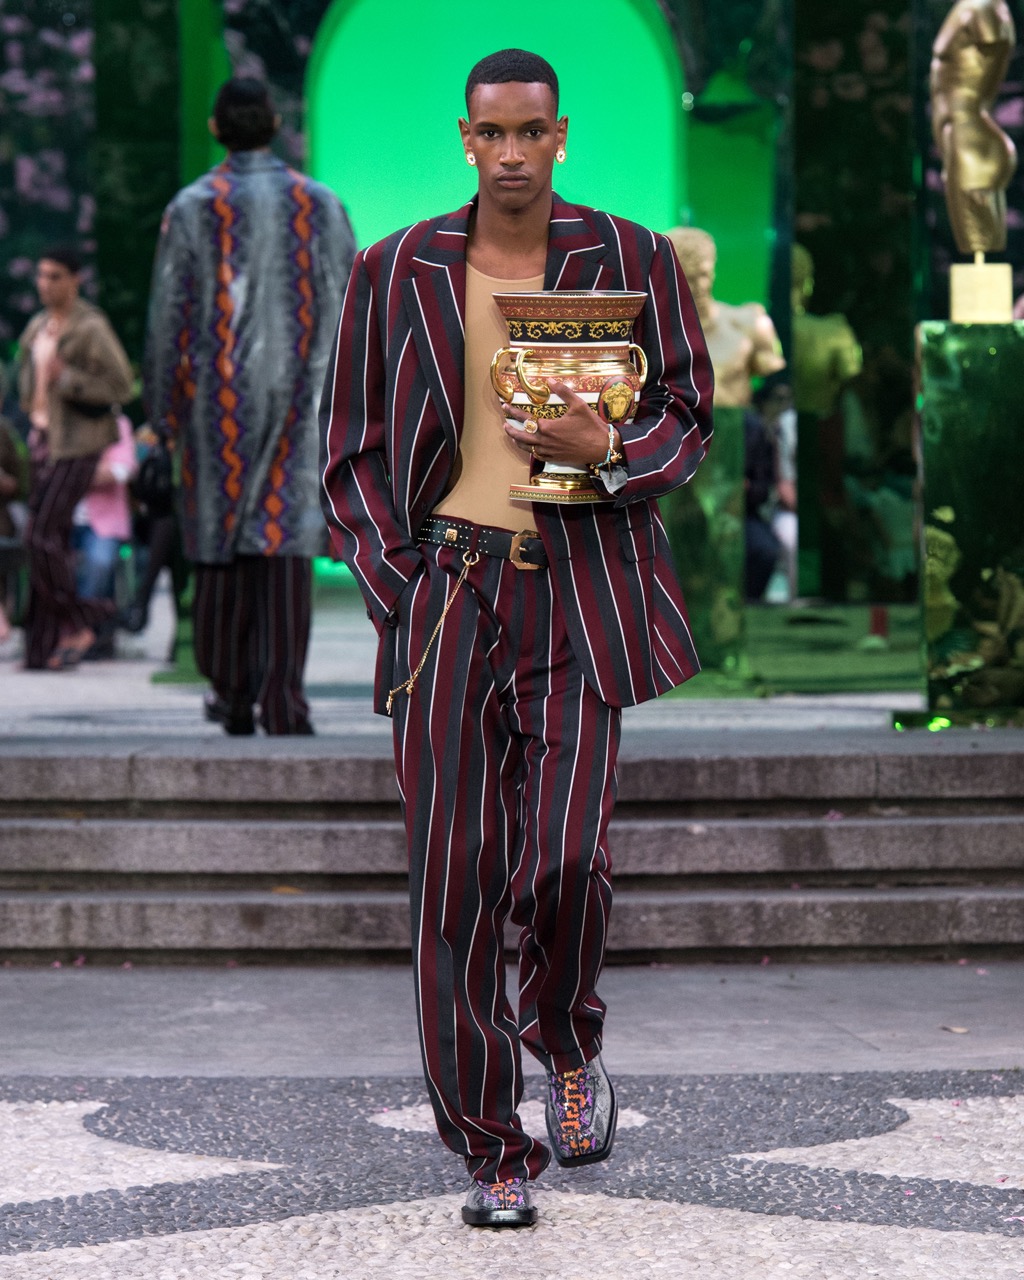 VERSACE on X: La Medusa Repeat. Included among new bags styles presented  on the runway, an archival Versace hobo bag is given a new re-edition as  the La Medusa Hobo Repeat. Watch